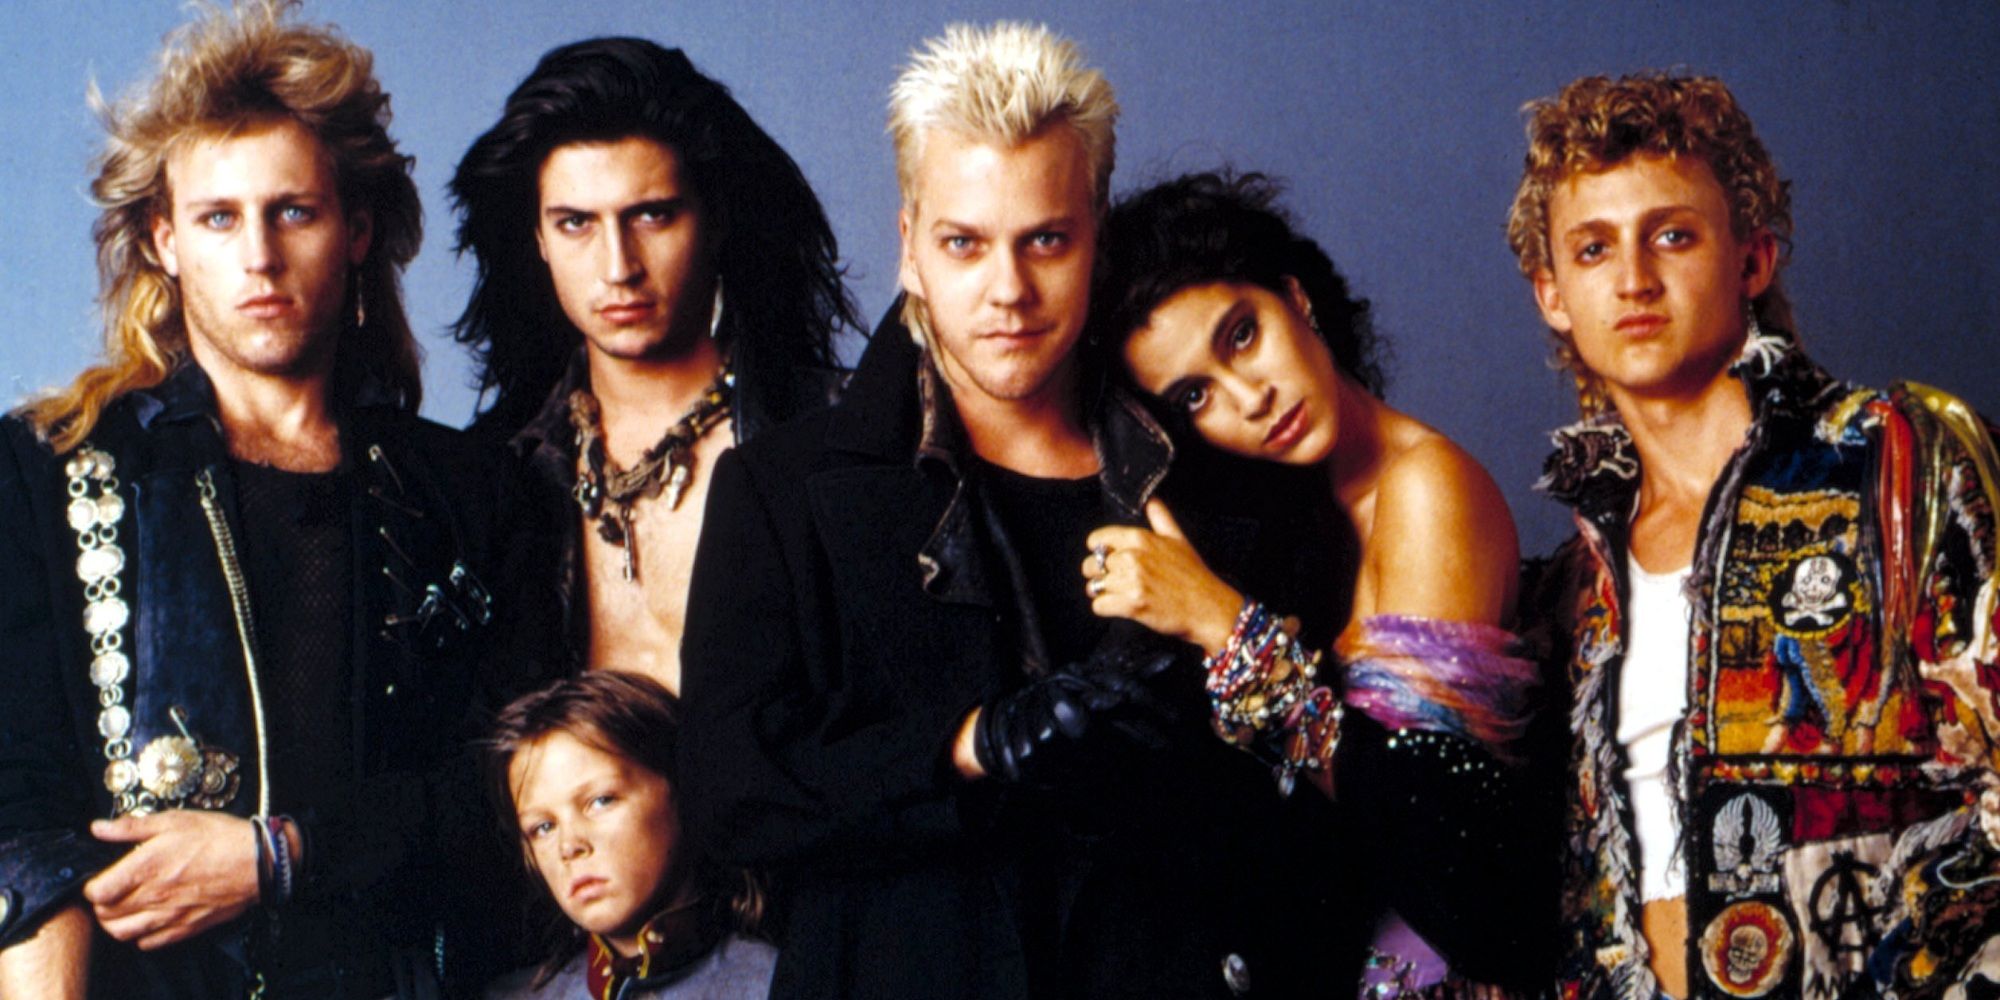 The Lost Boys vampires side by side